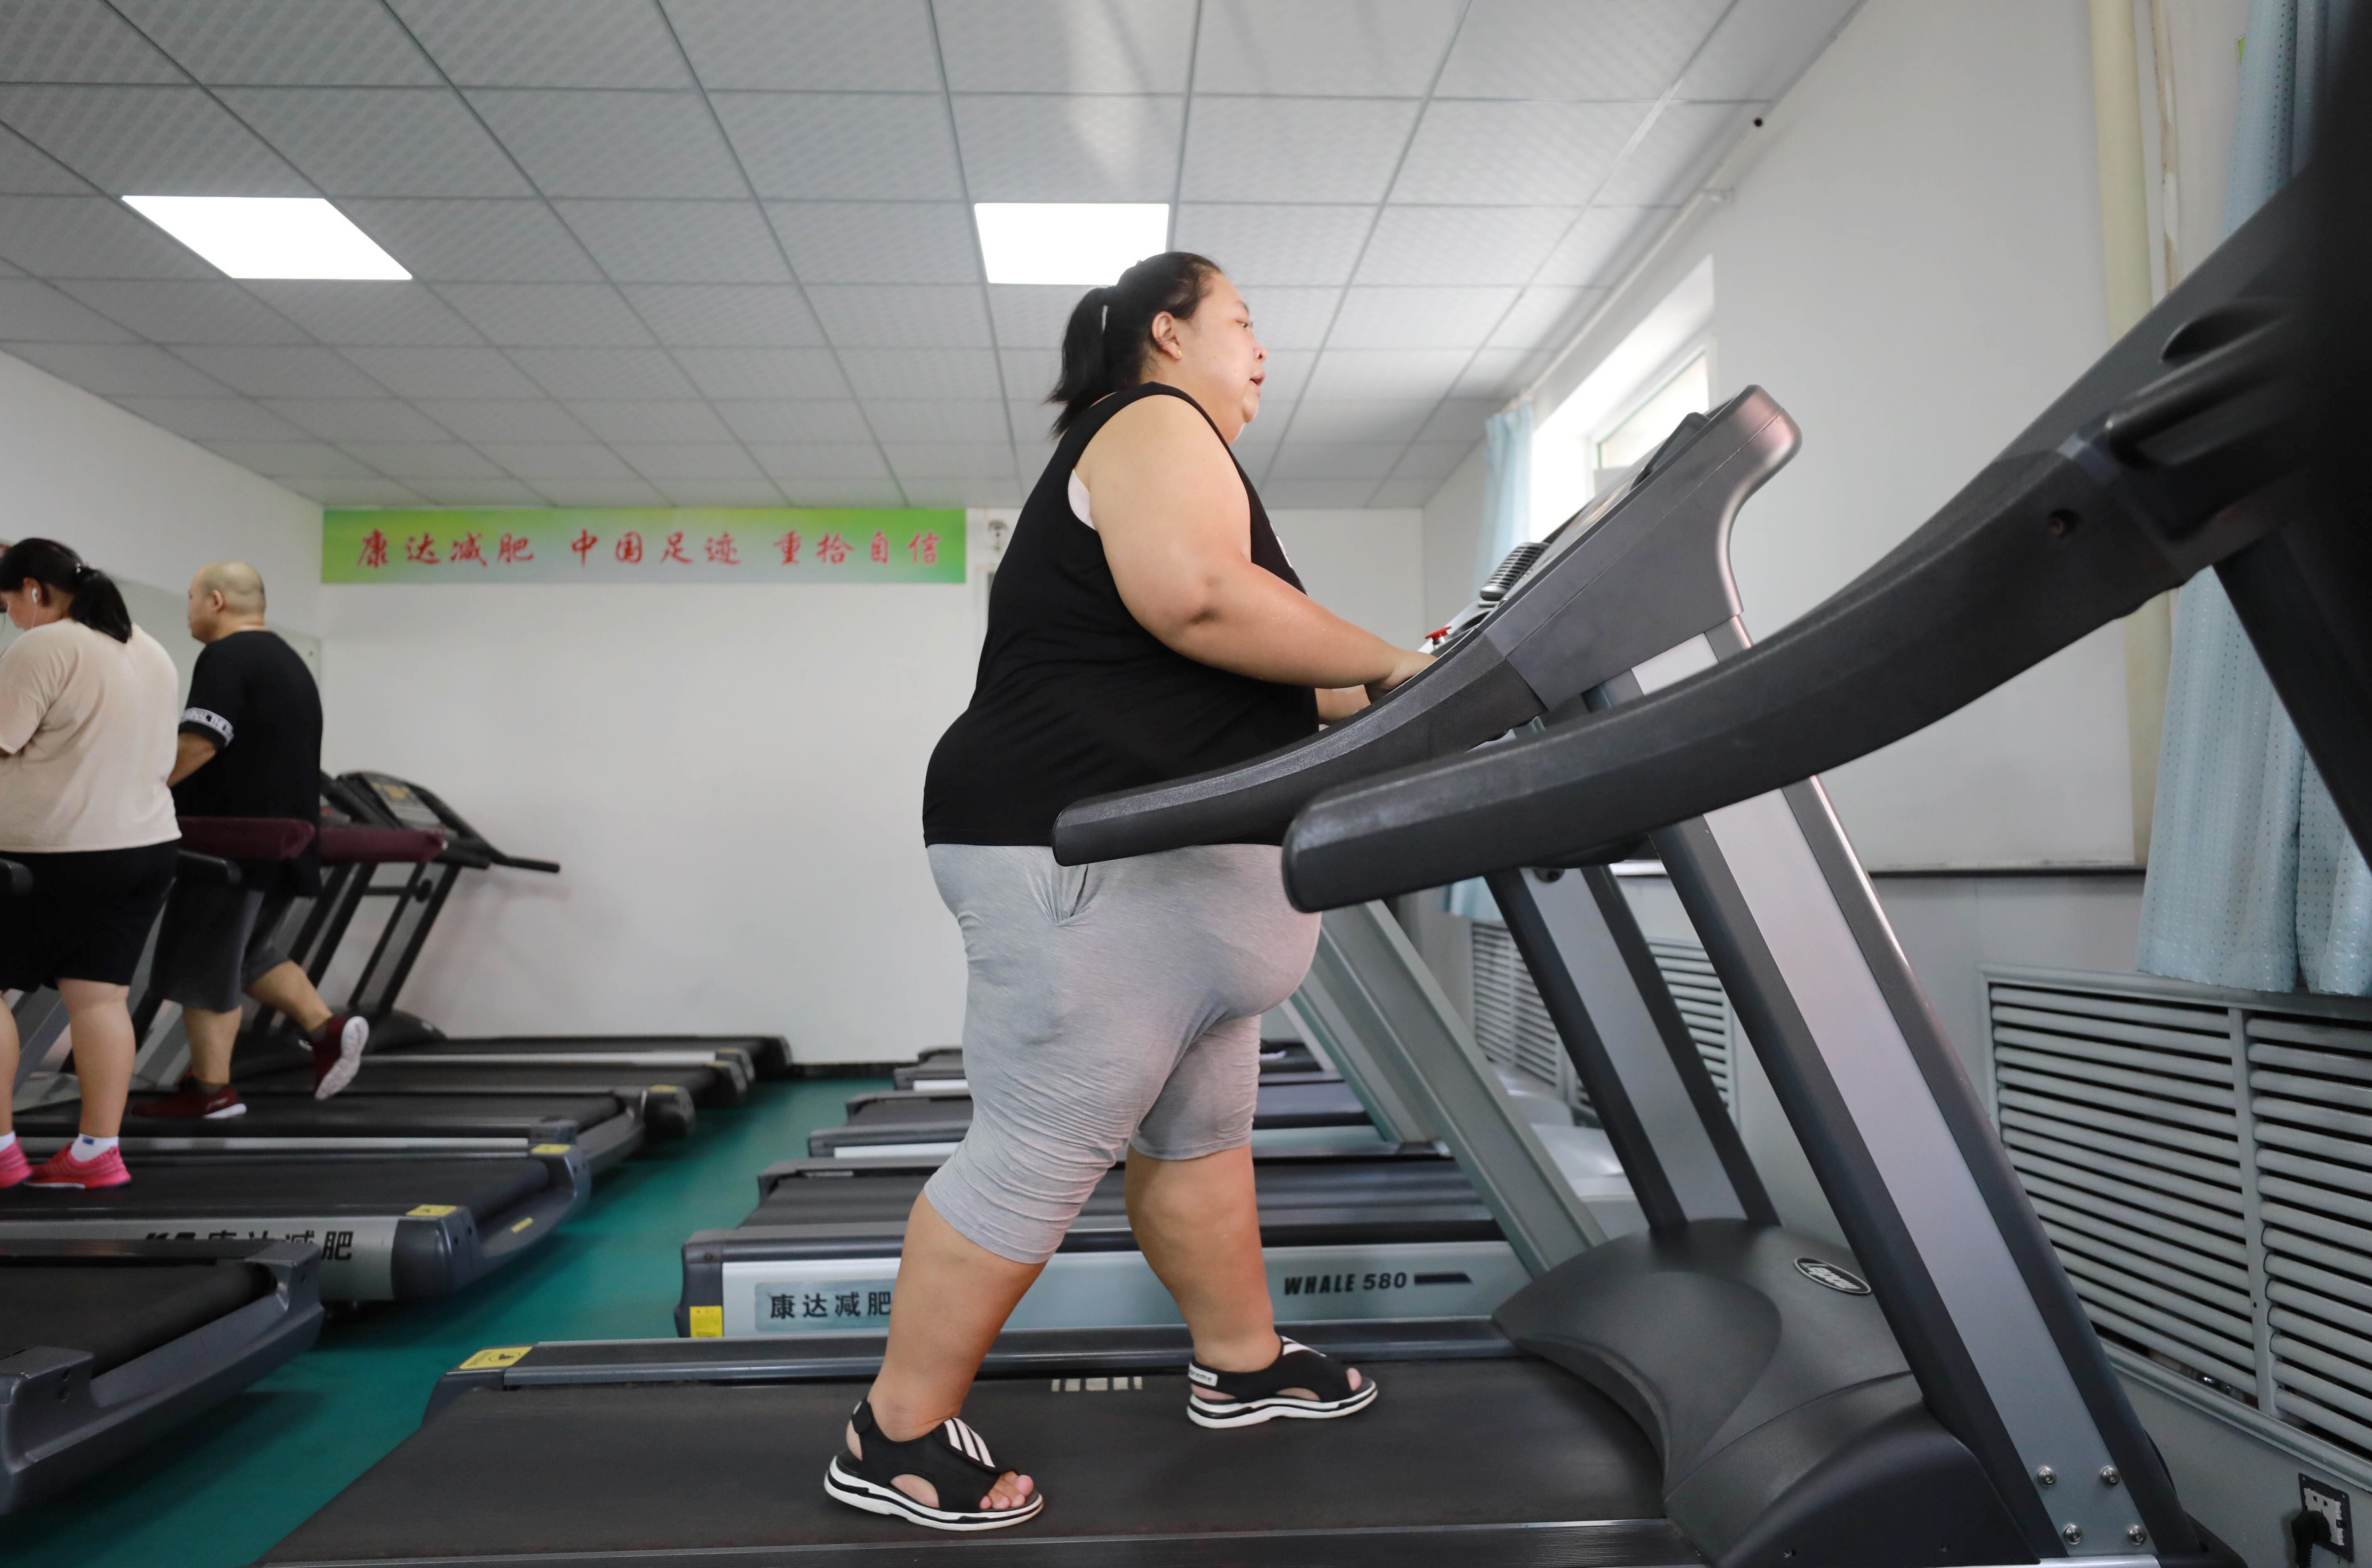 An overweight woman exercises at a weight loss clinic in Changchun, Jilin province, China. A new study has revealed that cholesterol levels are on the rise in Asia, but a healthy diet and exercise can still combat it. Photo: AFP